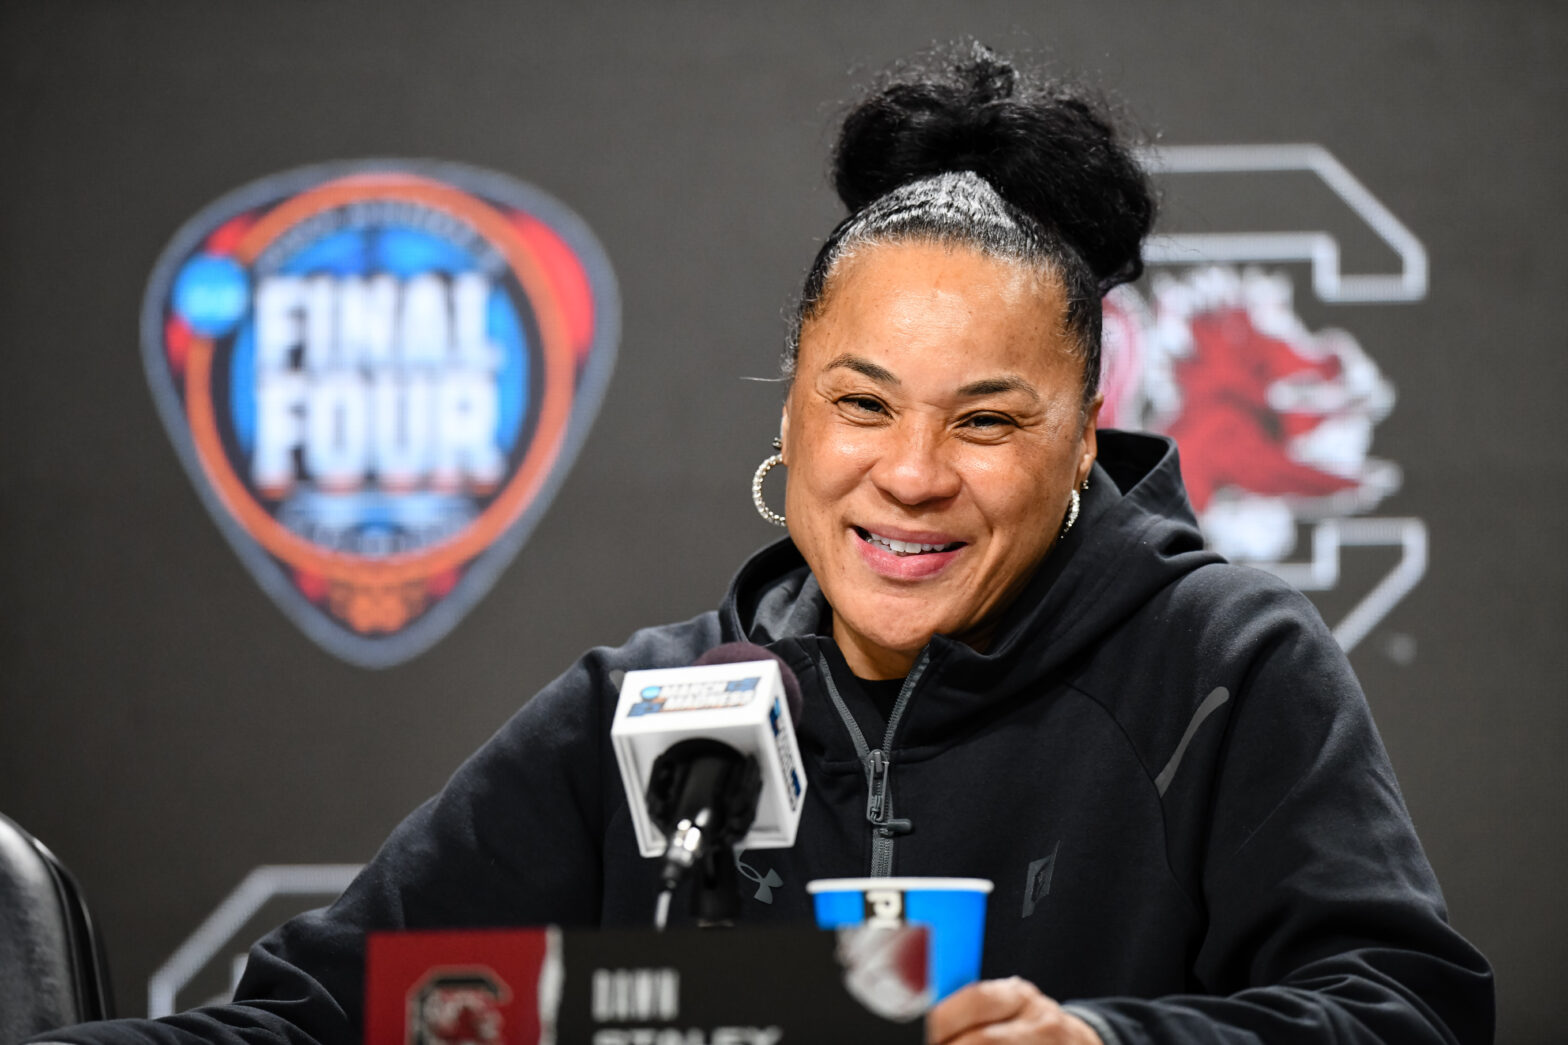 Dawn Staley: A Basketball Powerhouse Whose Net Worth Reflects Her Legacy